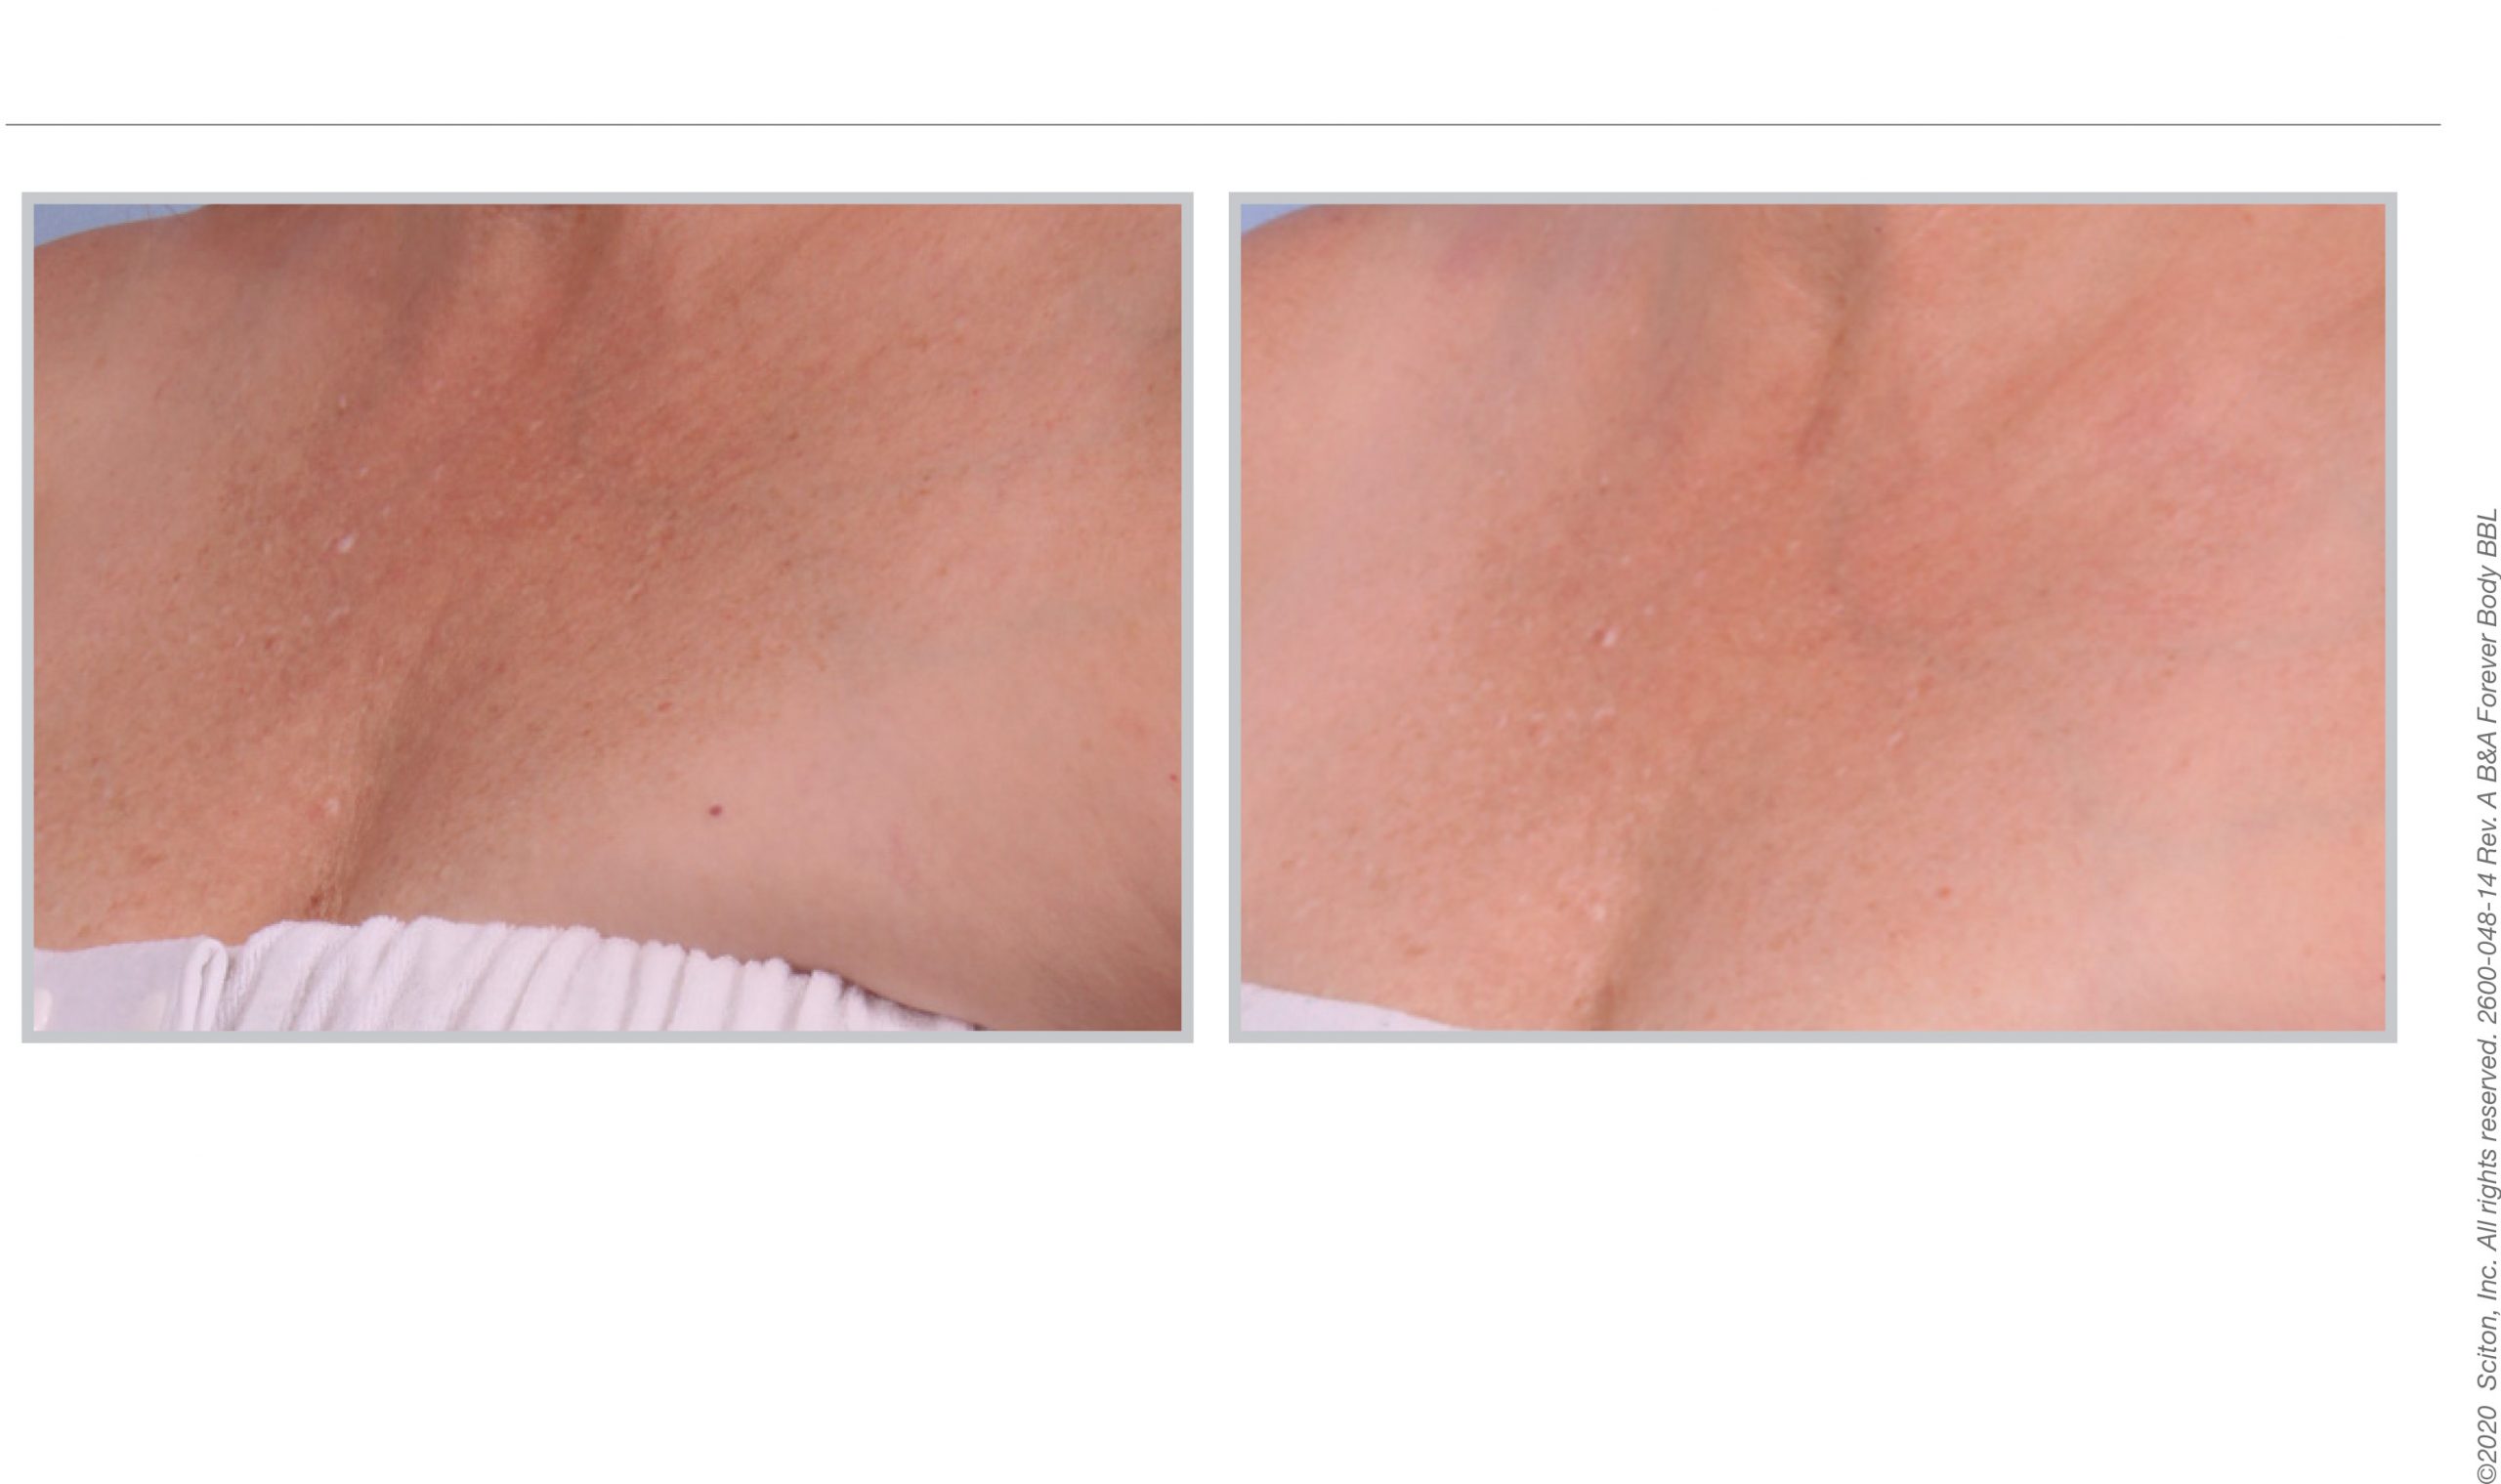 BBL treatment results 07, décolletage area, Infinity Skin Clinic Sydney